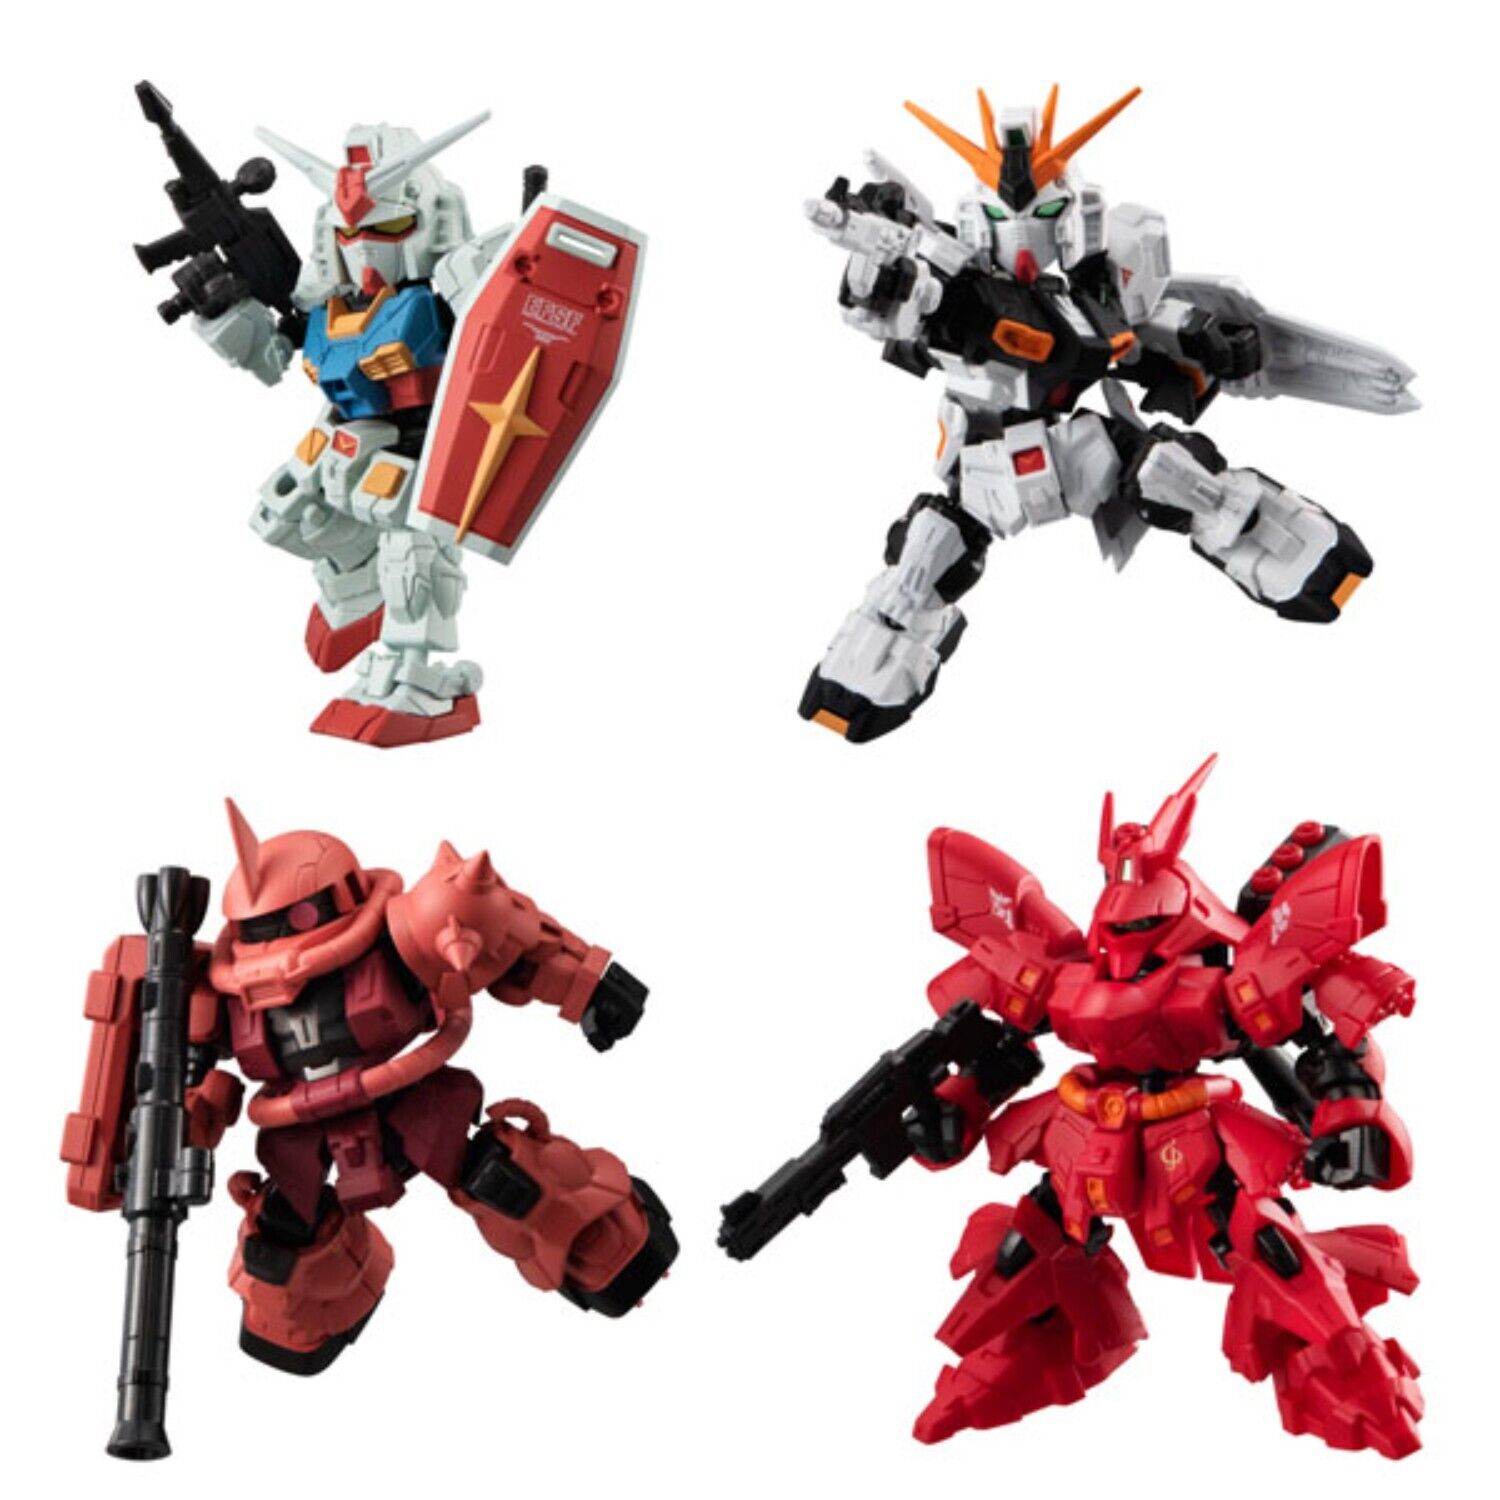 MOBILITY JOINT GUNDAM SP Figure Collection Toy 8 Types Full Comp Set Mascot New